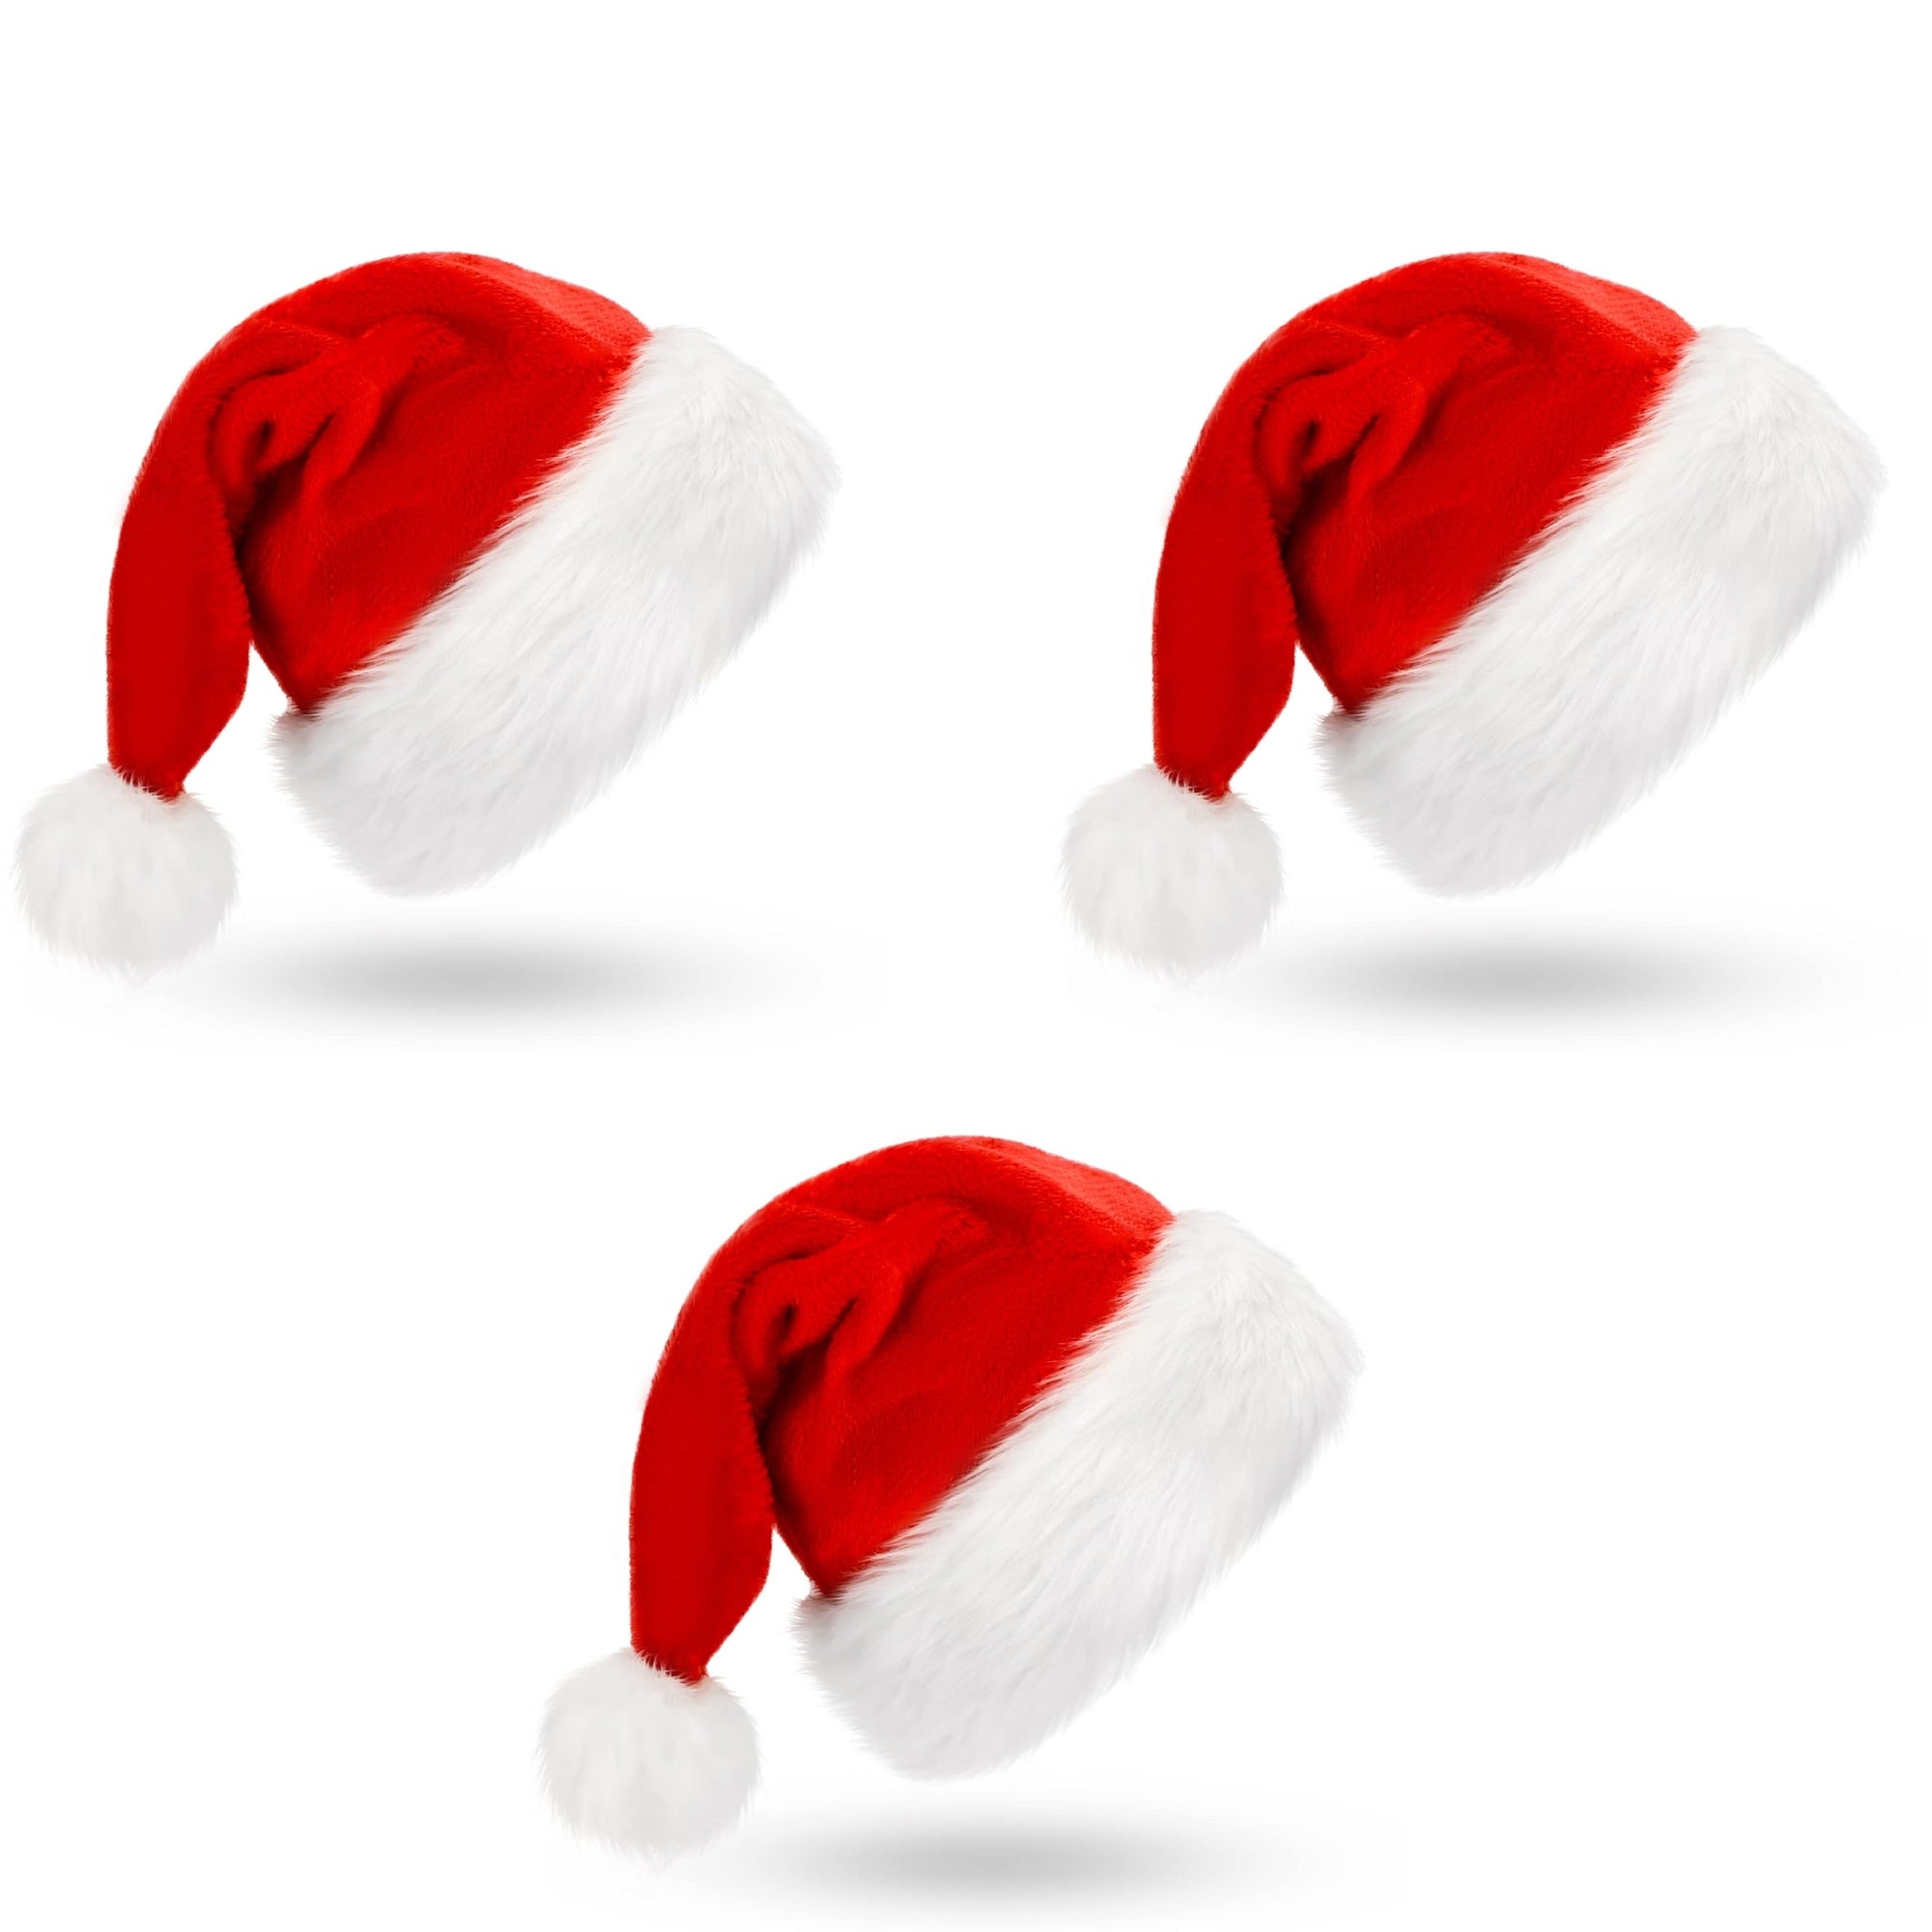 eCraftIndia Red and White Velvet Classic Fur Merry Christmas Hats, Santa Claus Caps for kids and Adults - XMAS Caps, Santa Hats for Christmas, New Year, Festive Holiday Party Celebration (Set of 3) 6